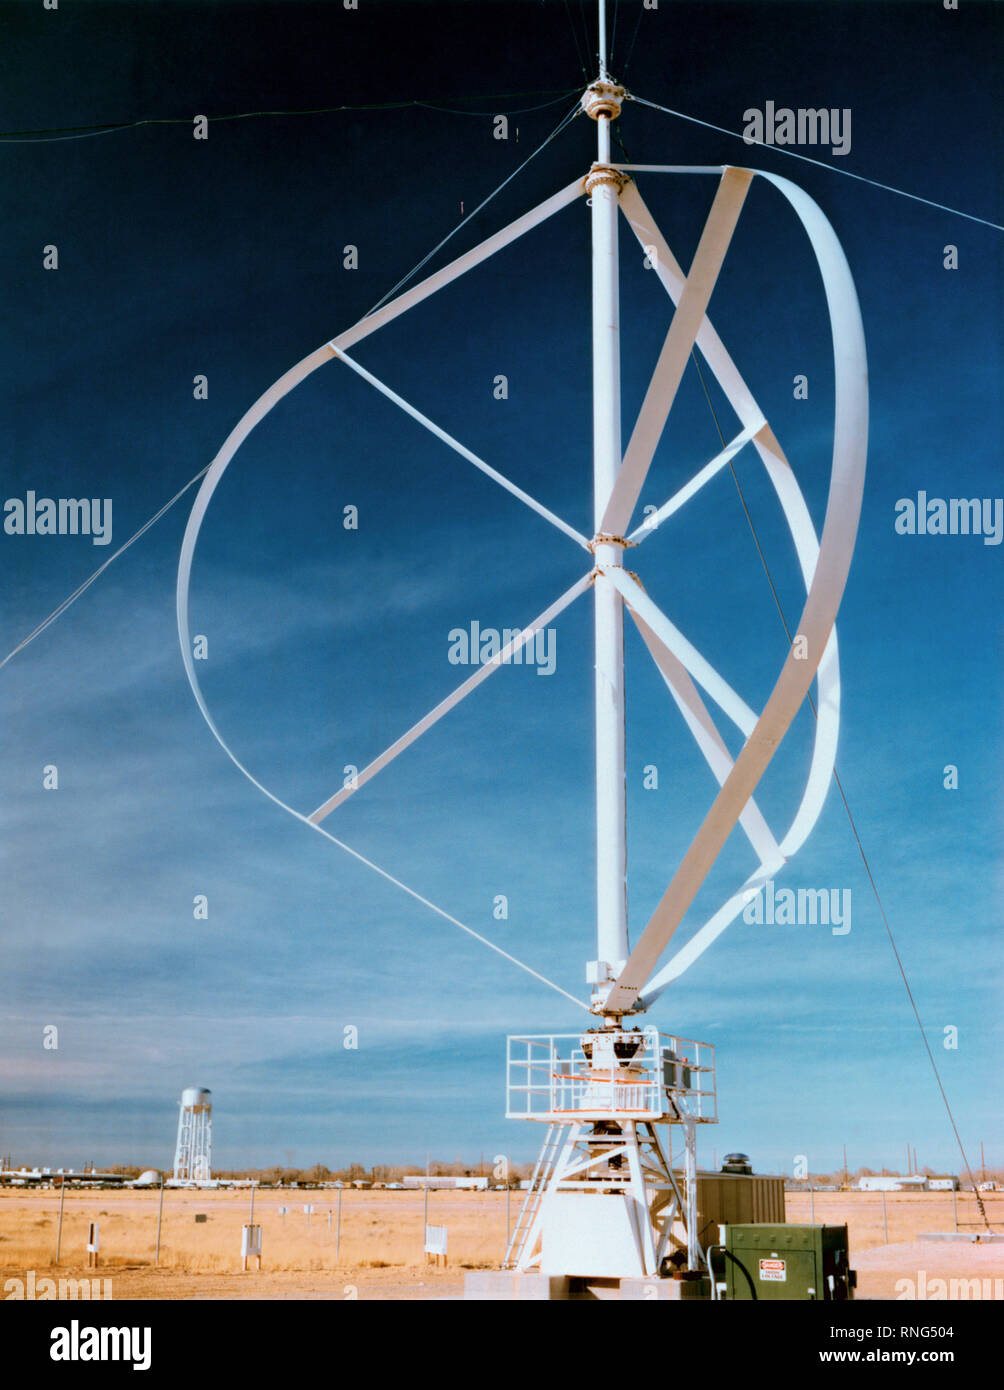 A view of a vertical axis wind turbine of the Darrieus design.  This machine is 17 meters high and produces up to 150 kilowatts of wind power. Stock Photo